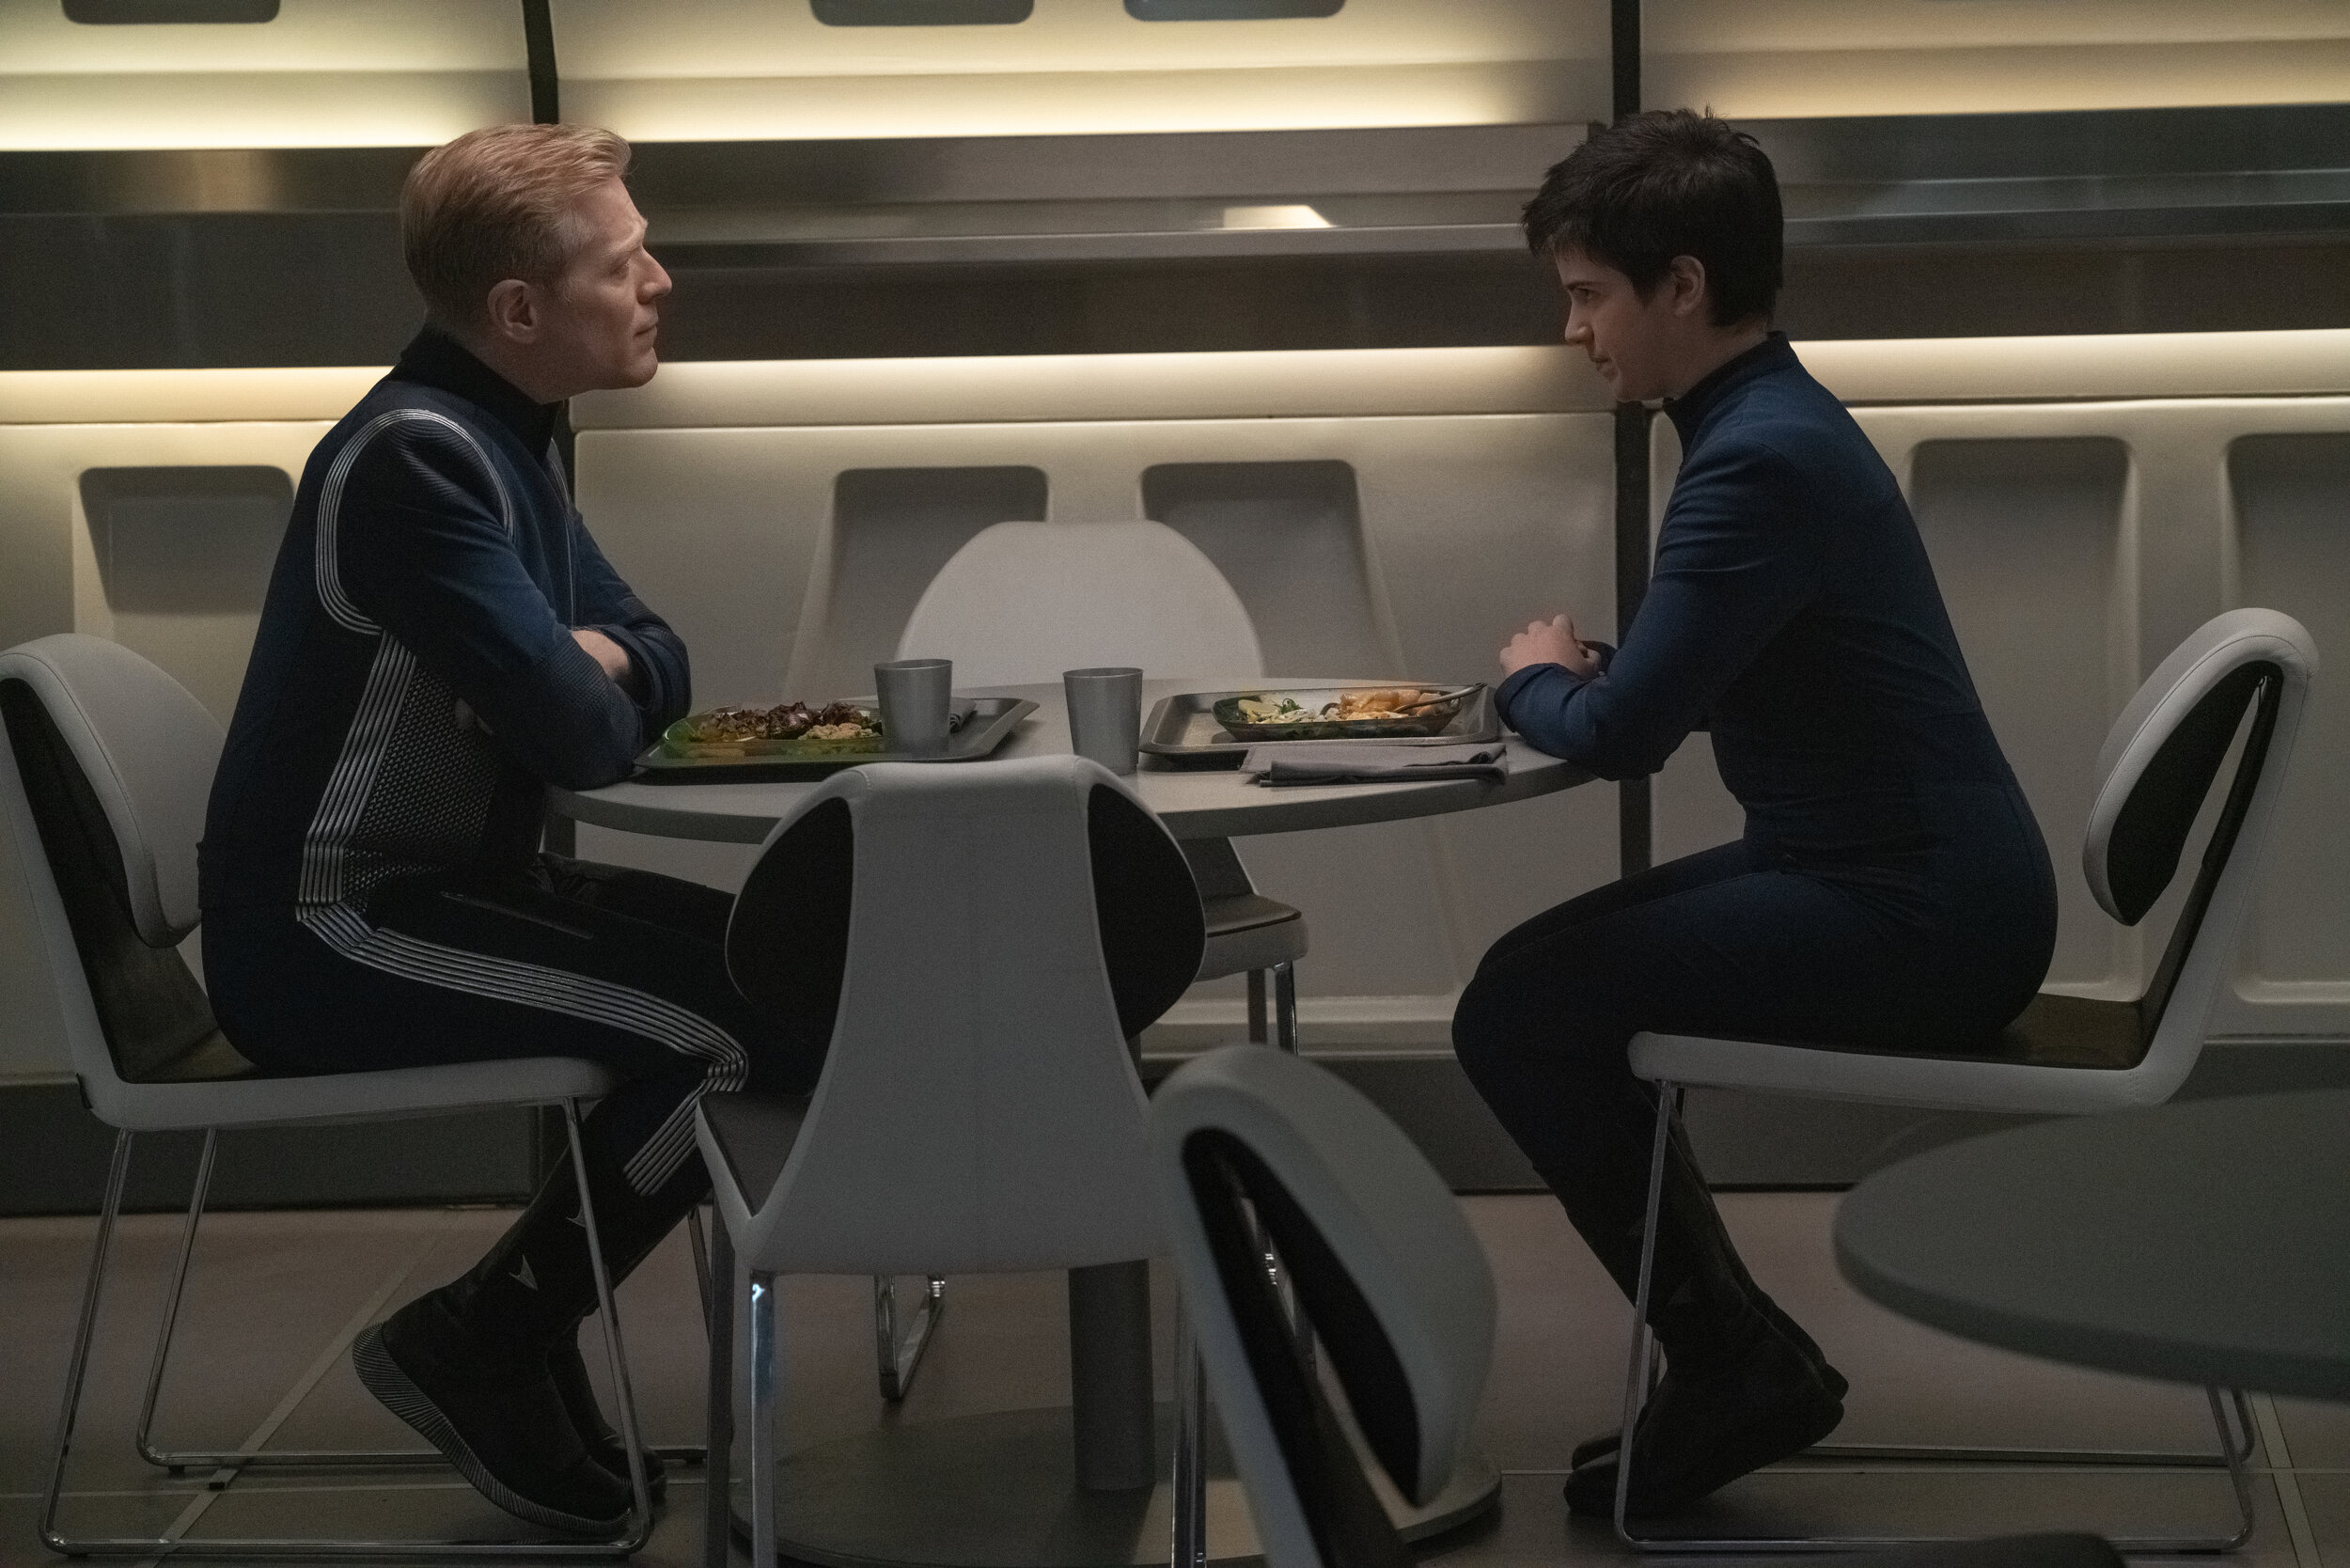   "Scavengers" -- Ep#306 -- Pictured: Anthony Rapp as Lt. Paul Stamets and Blu del Barrio as Adira of the CBS All Access series STAR TREK: DISCOVERY. Photo Cr: Michael Gibson/CBS ©2020 CBS Interactive, Inc. All Rights Reserved.  